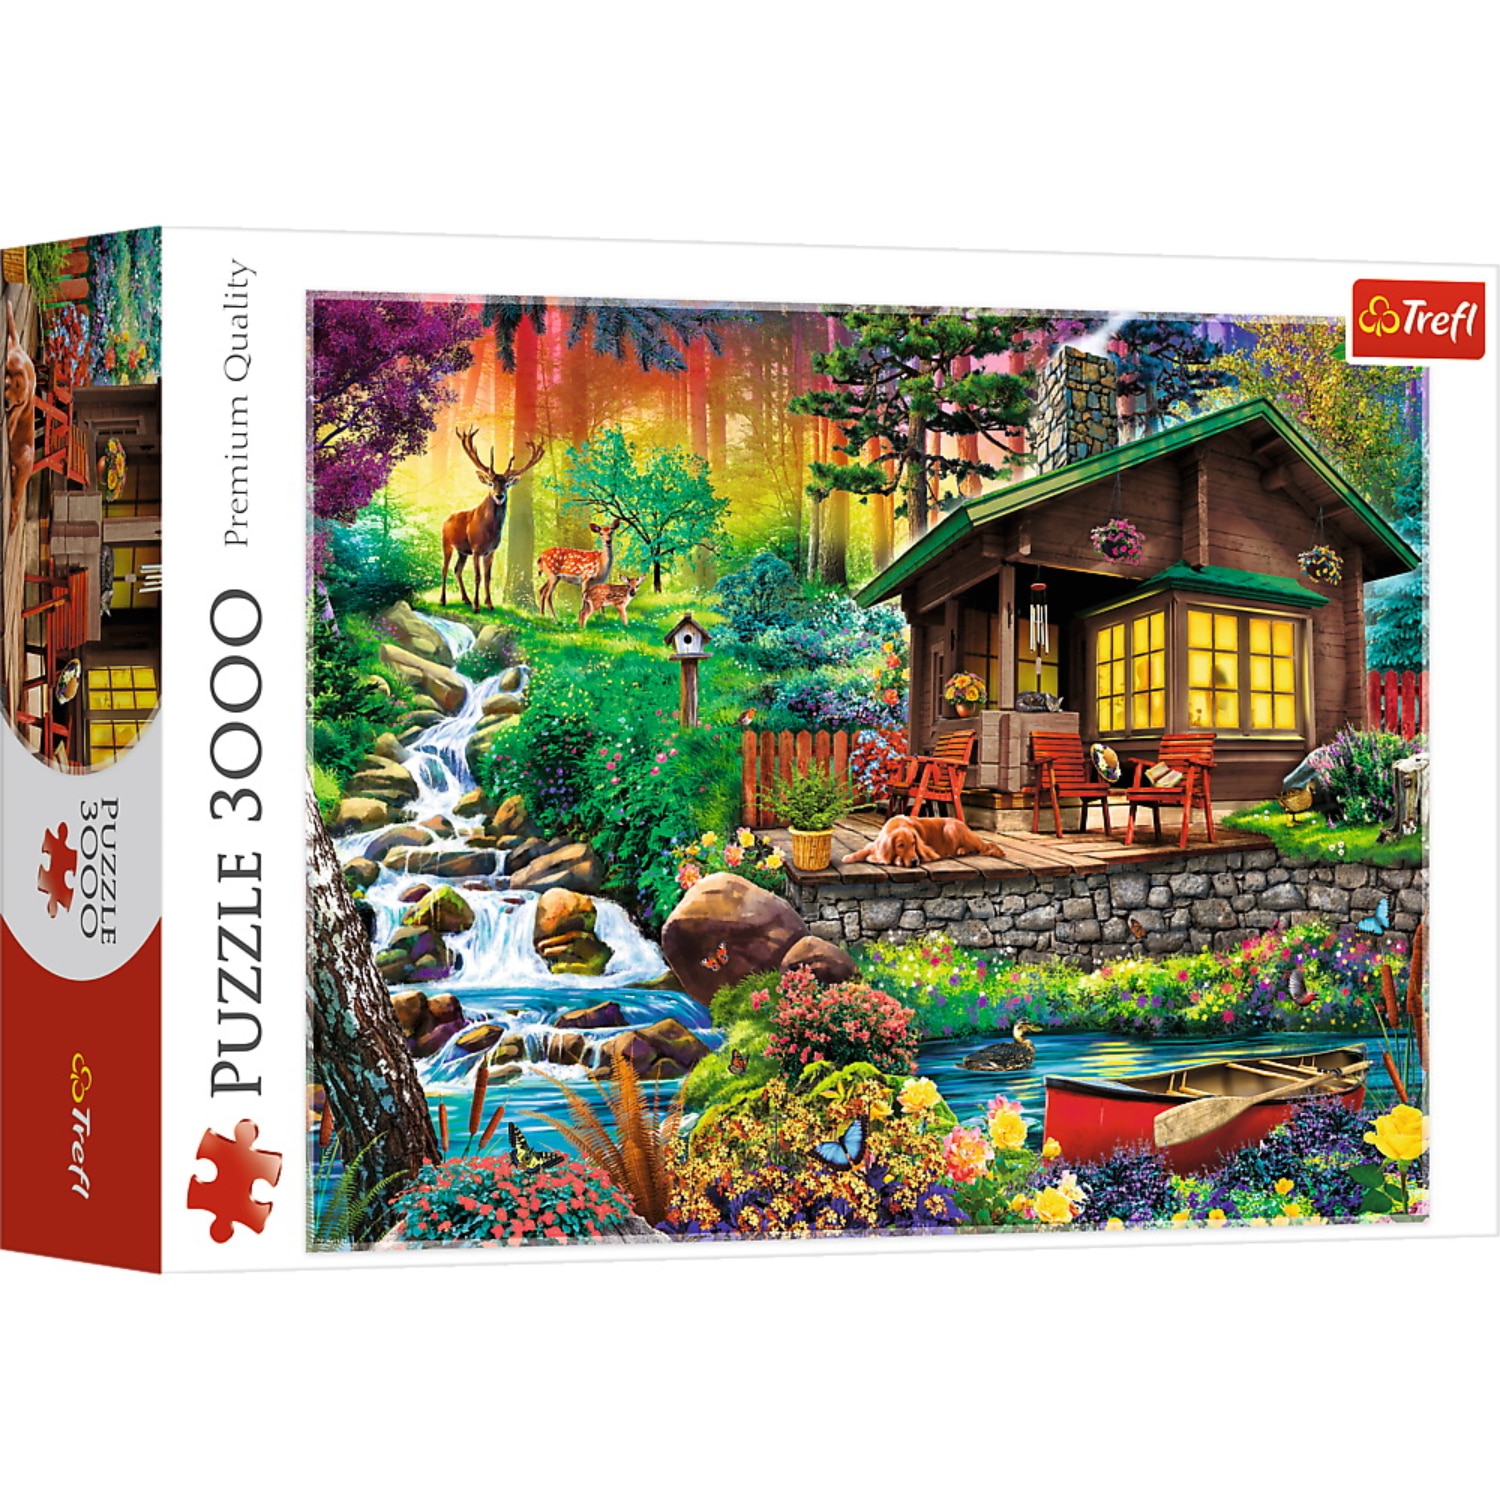 Rationalization Thanksgiving Change clothes Puzzle Trefl, Cabana din padure, 3000 piese - eMAG.ro